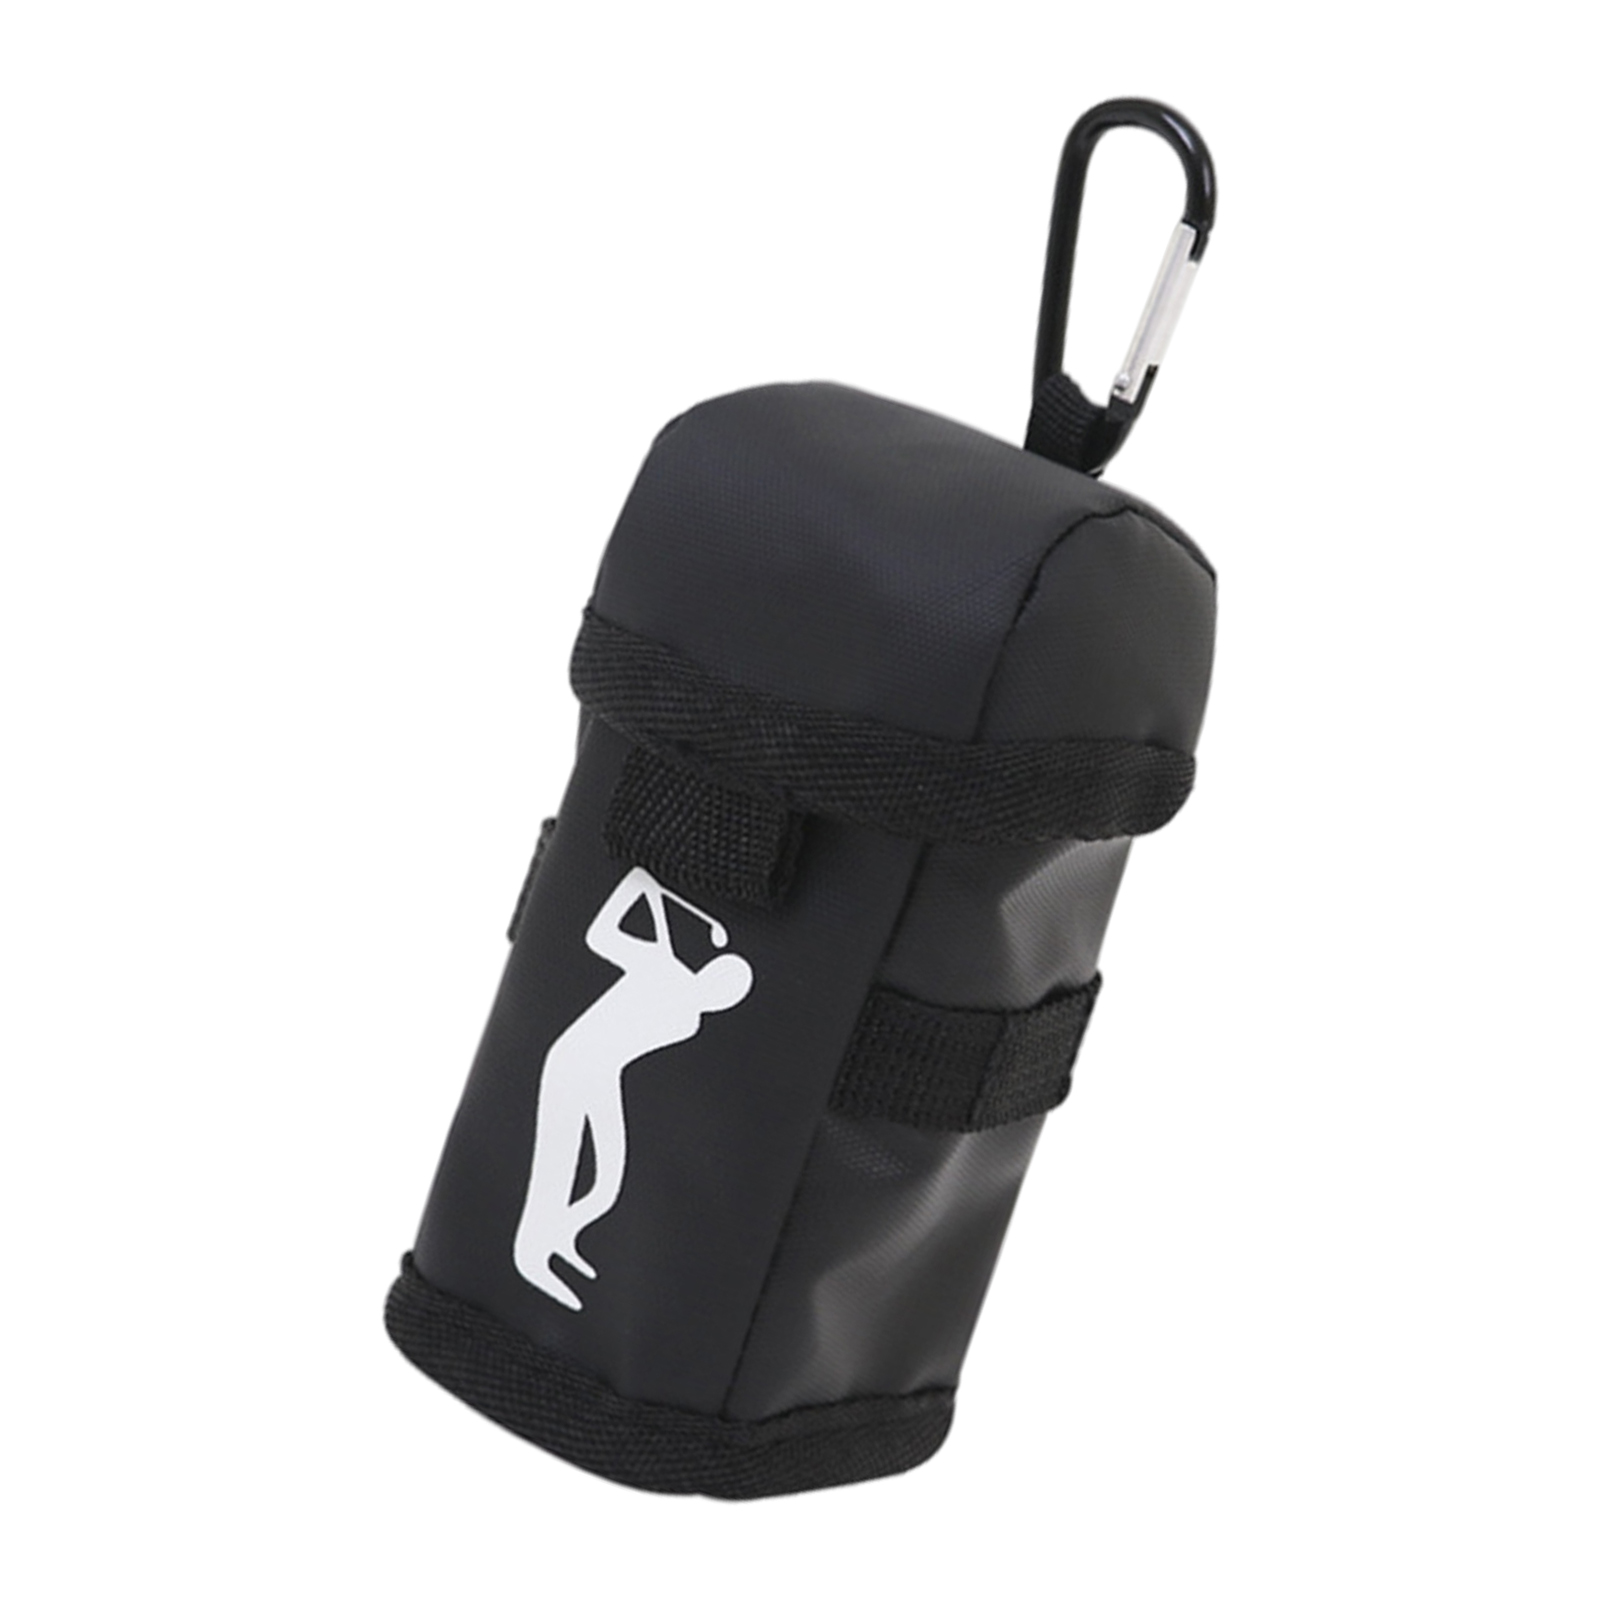 Golf Ball Carry Bag Small Golf Accessories Waterproof Pouch with Hook Black